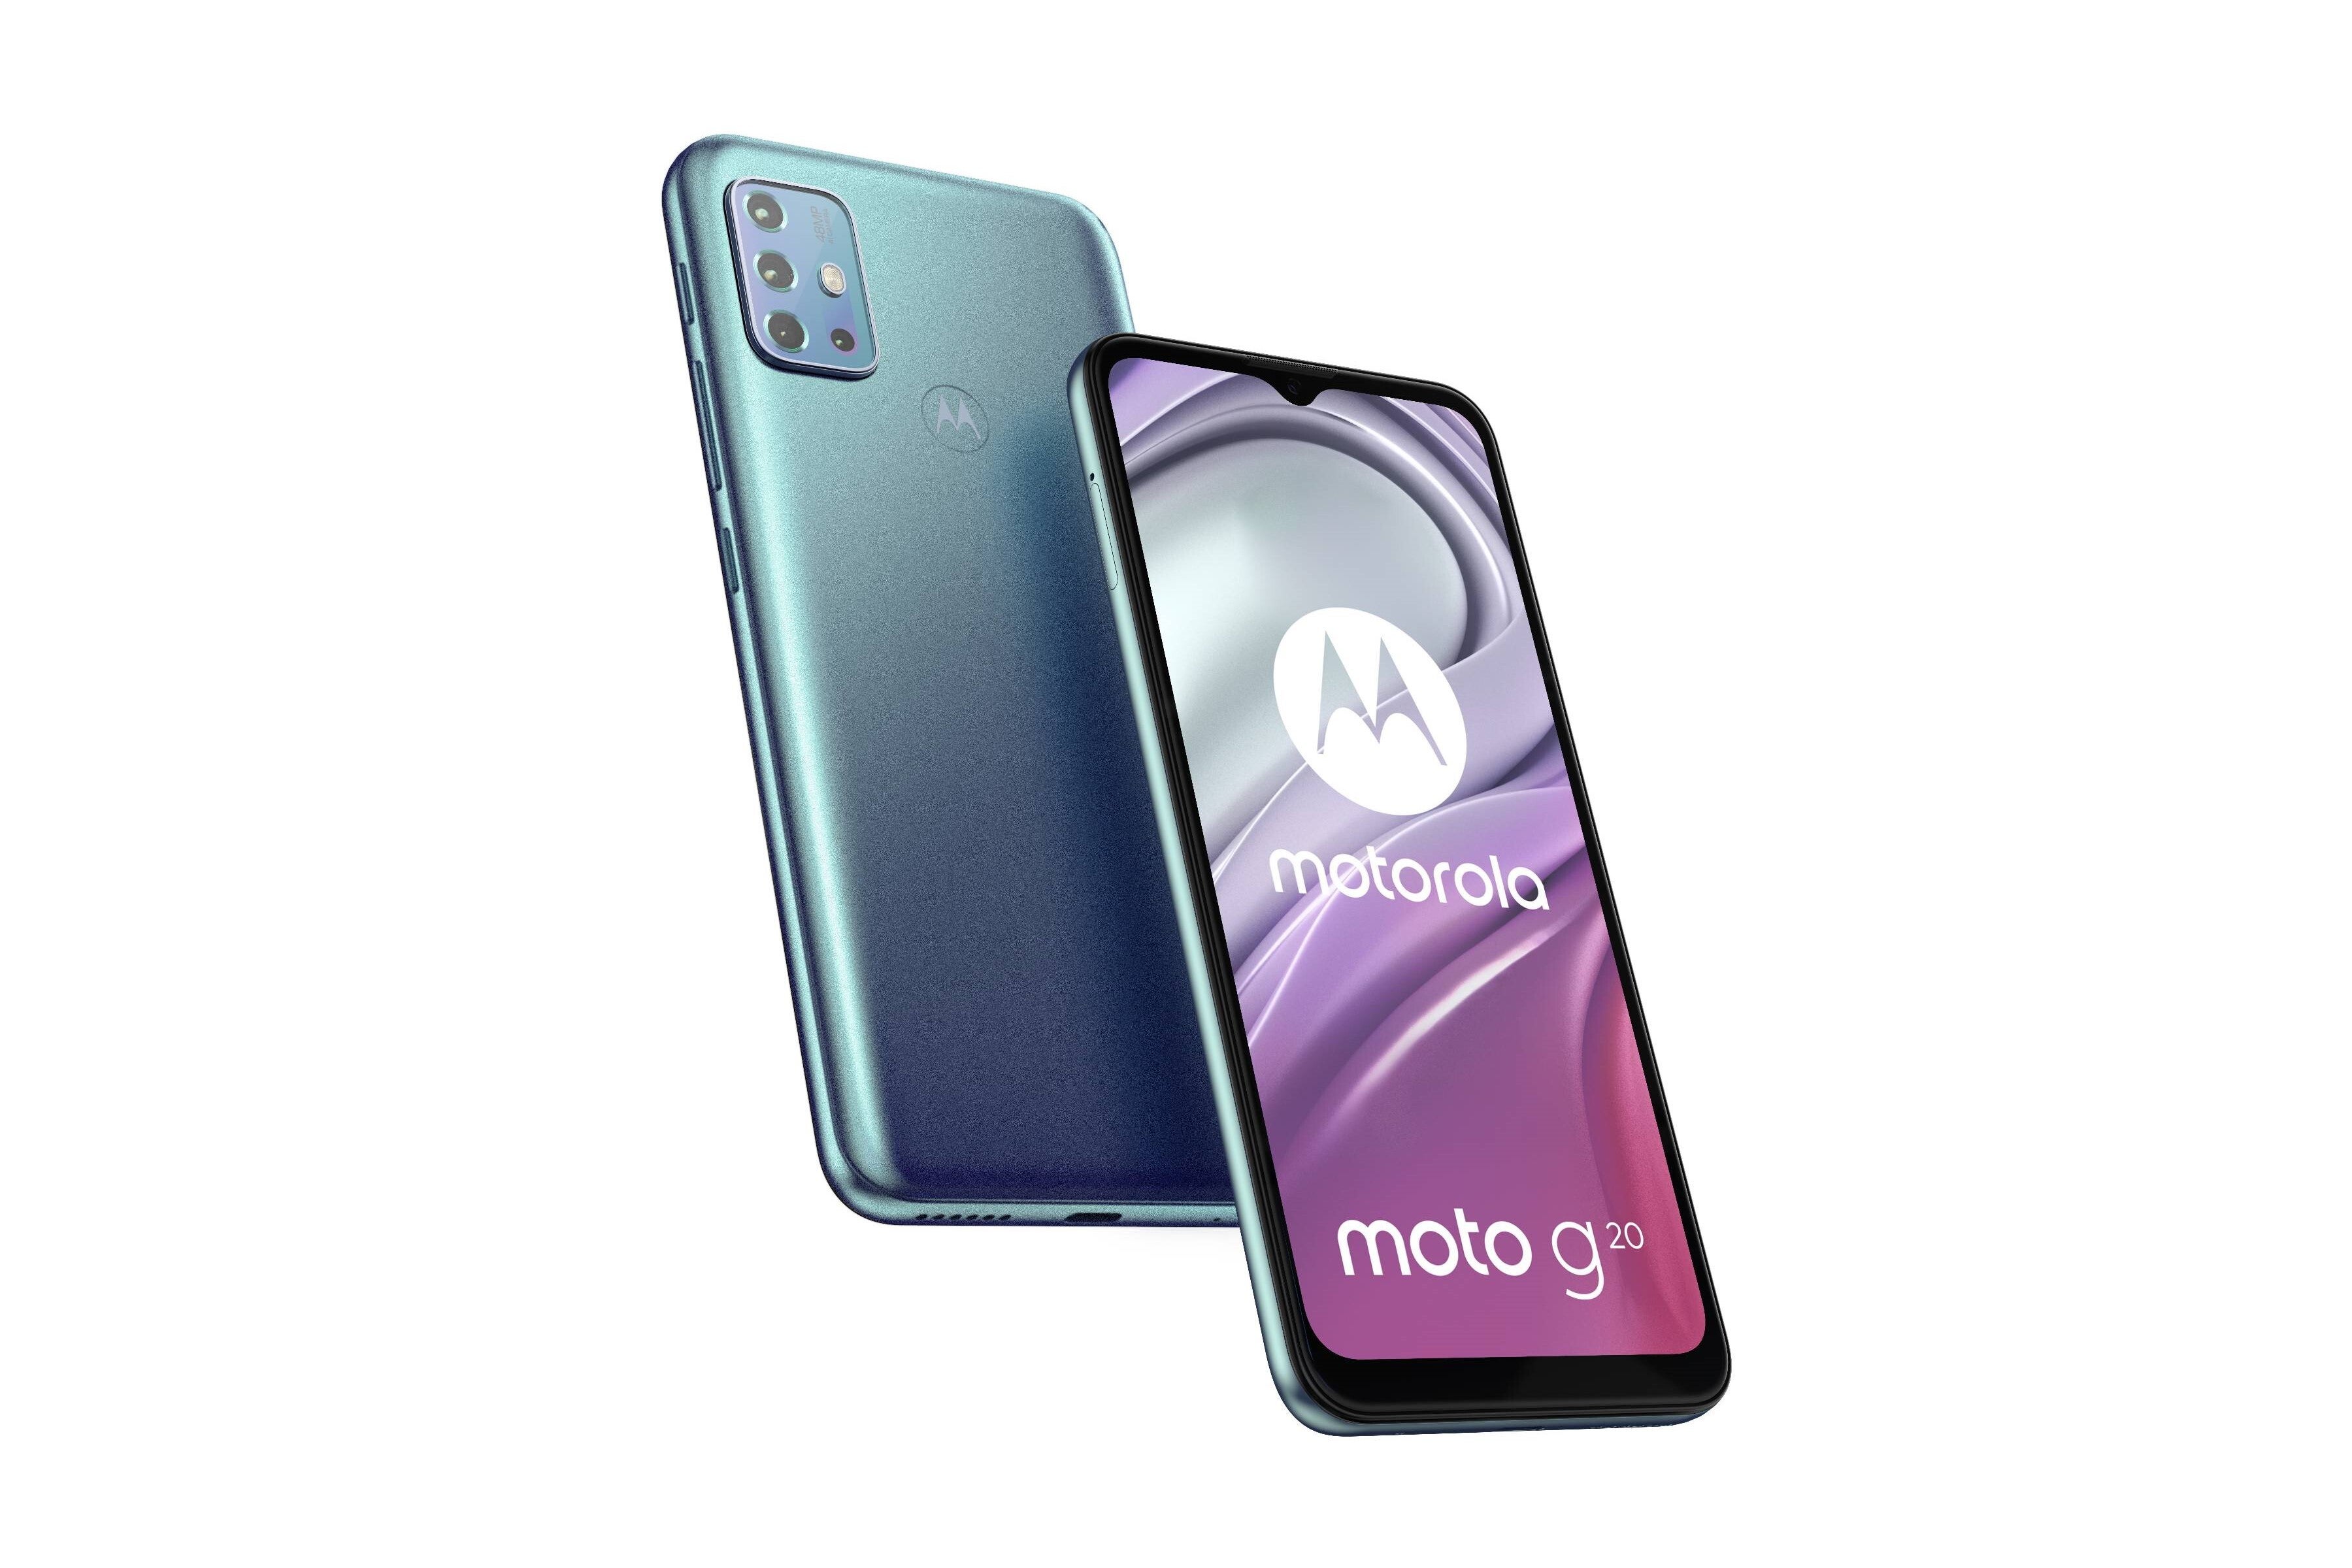 Moto G20 in Sky Blue - Moto G20 leaks again with a quad-camera array, headphone jack, and unimpressive chip